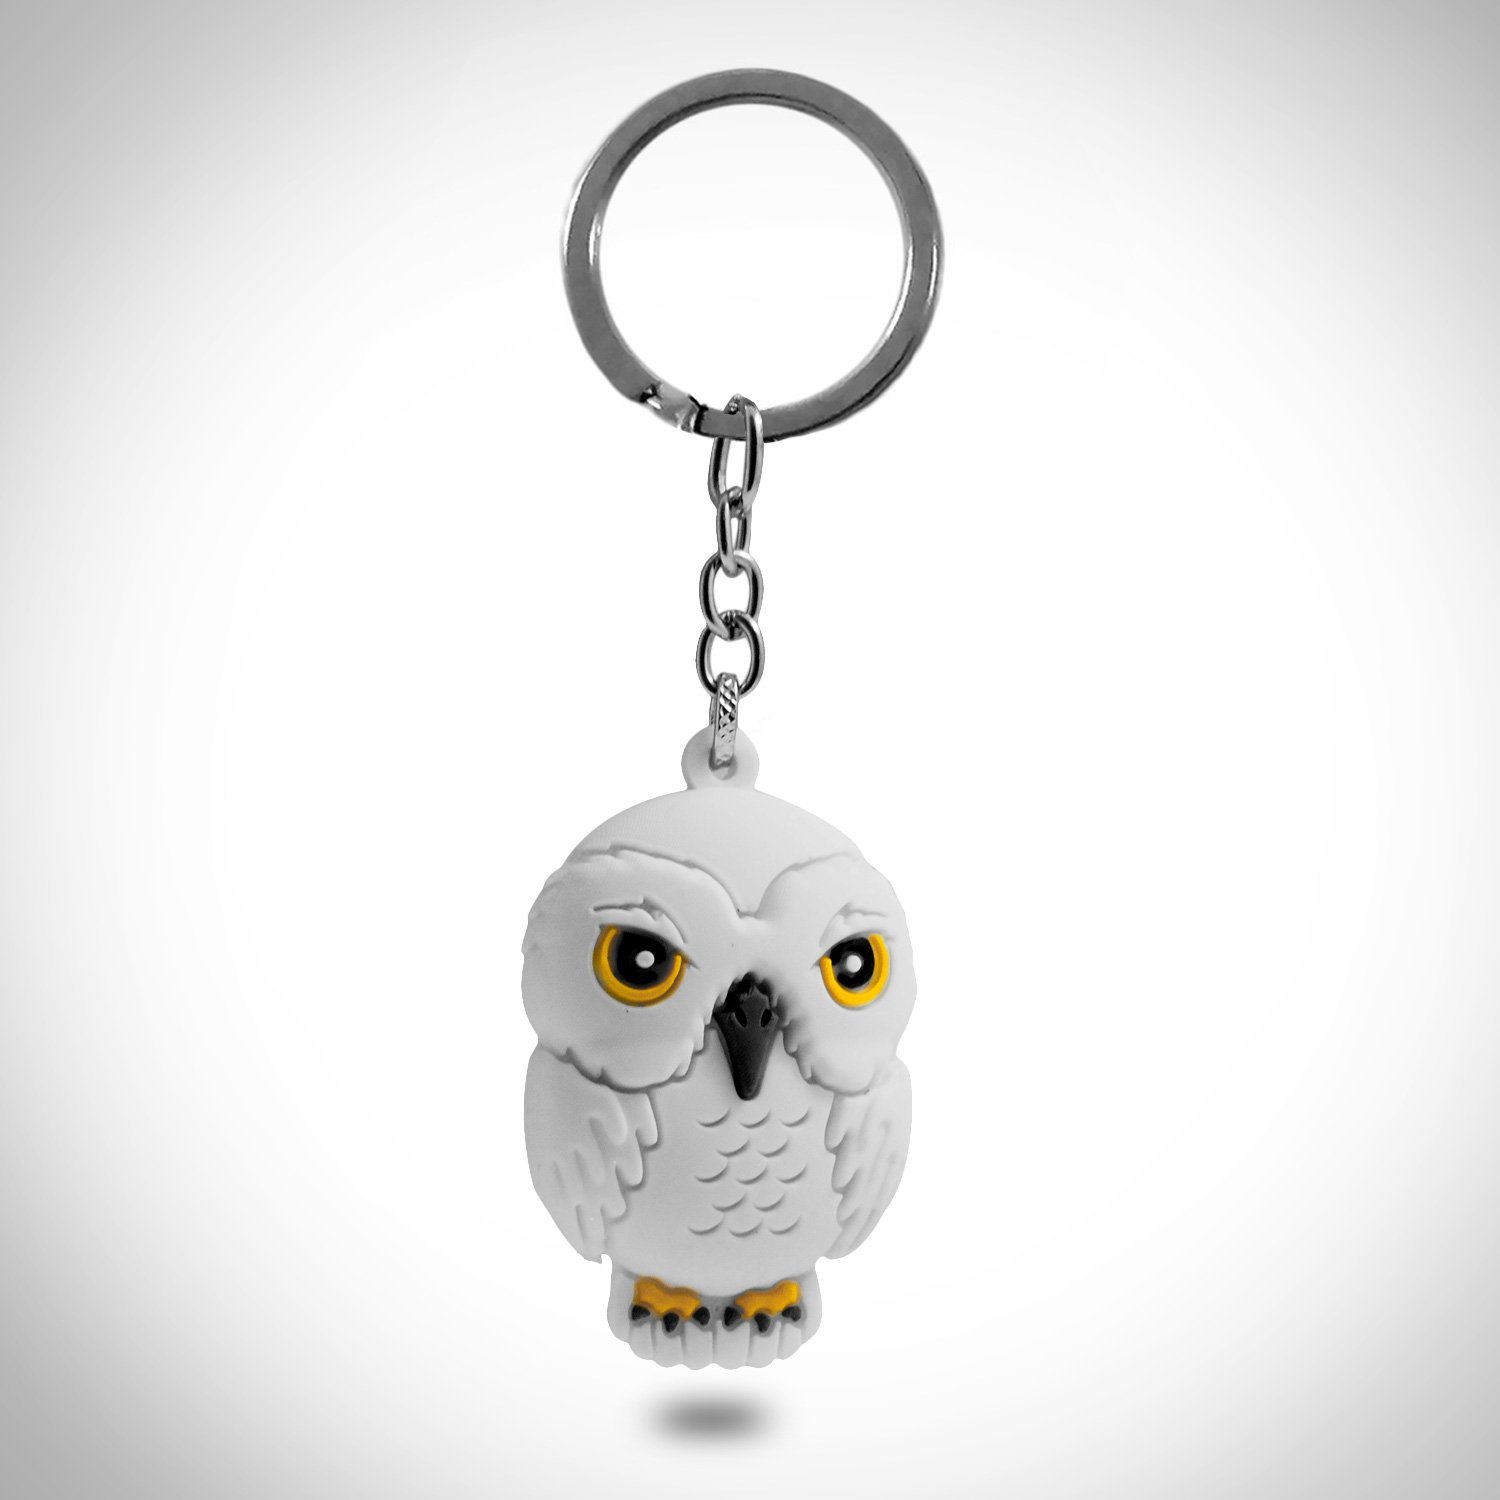 Harry Potter Hedwig Xl 3d Collectible Rubber Keychain